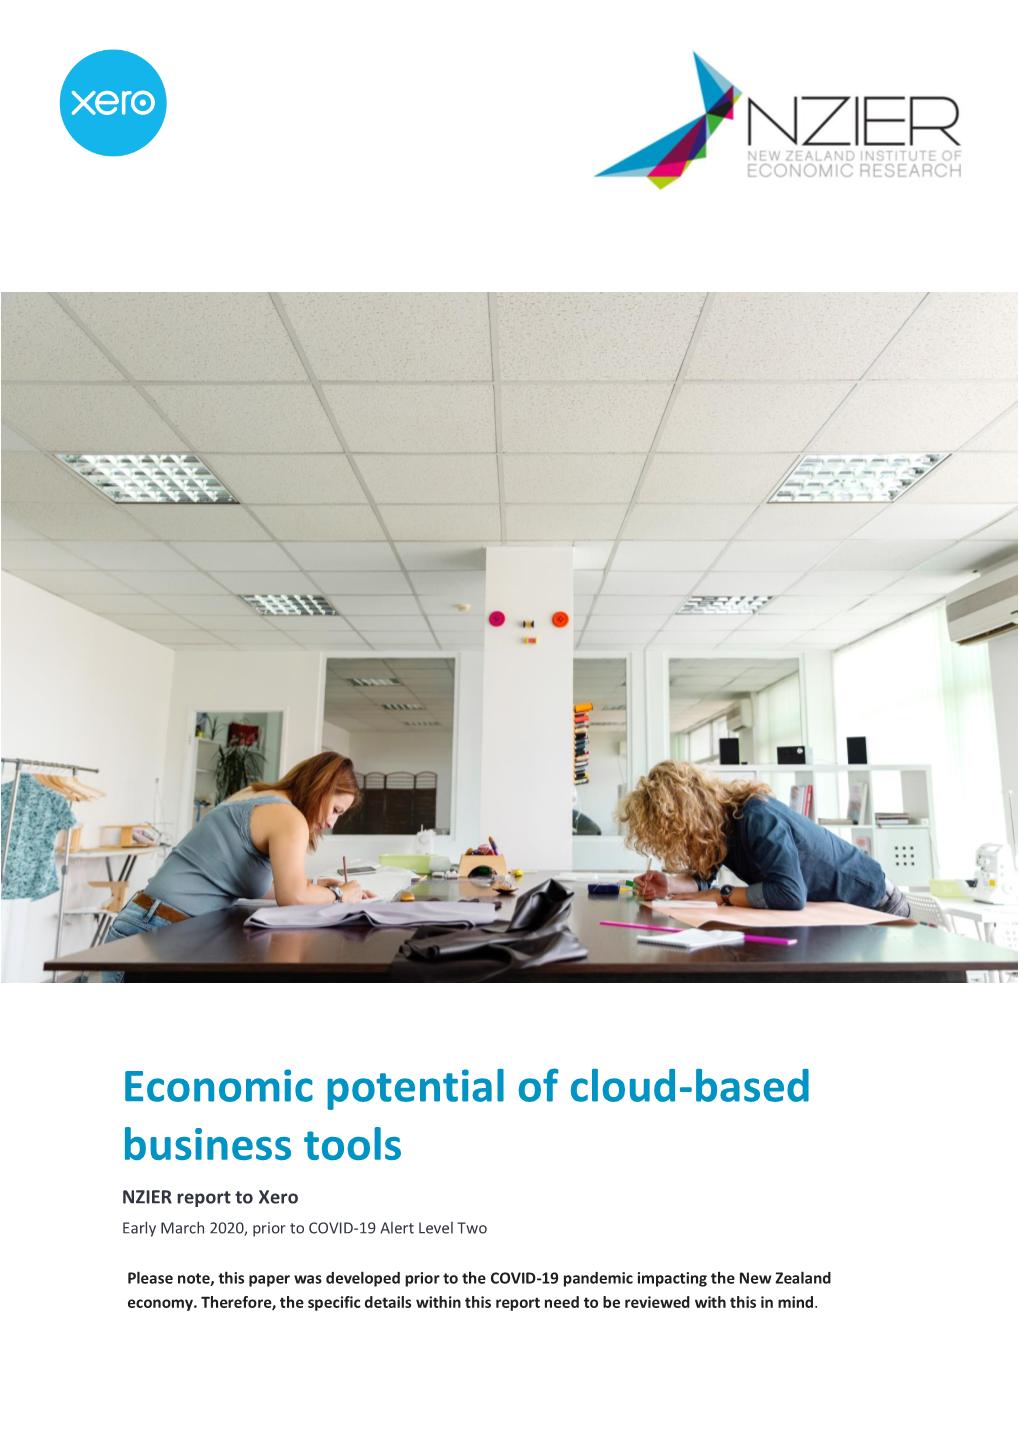 Economic Potential of Cloud-Based Business Tools NZIER Report to Xero Early March 2020, Prior to COVID-19 Alert Level Two